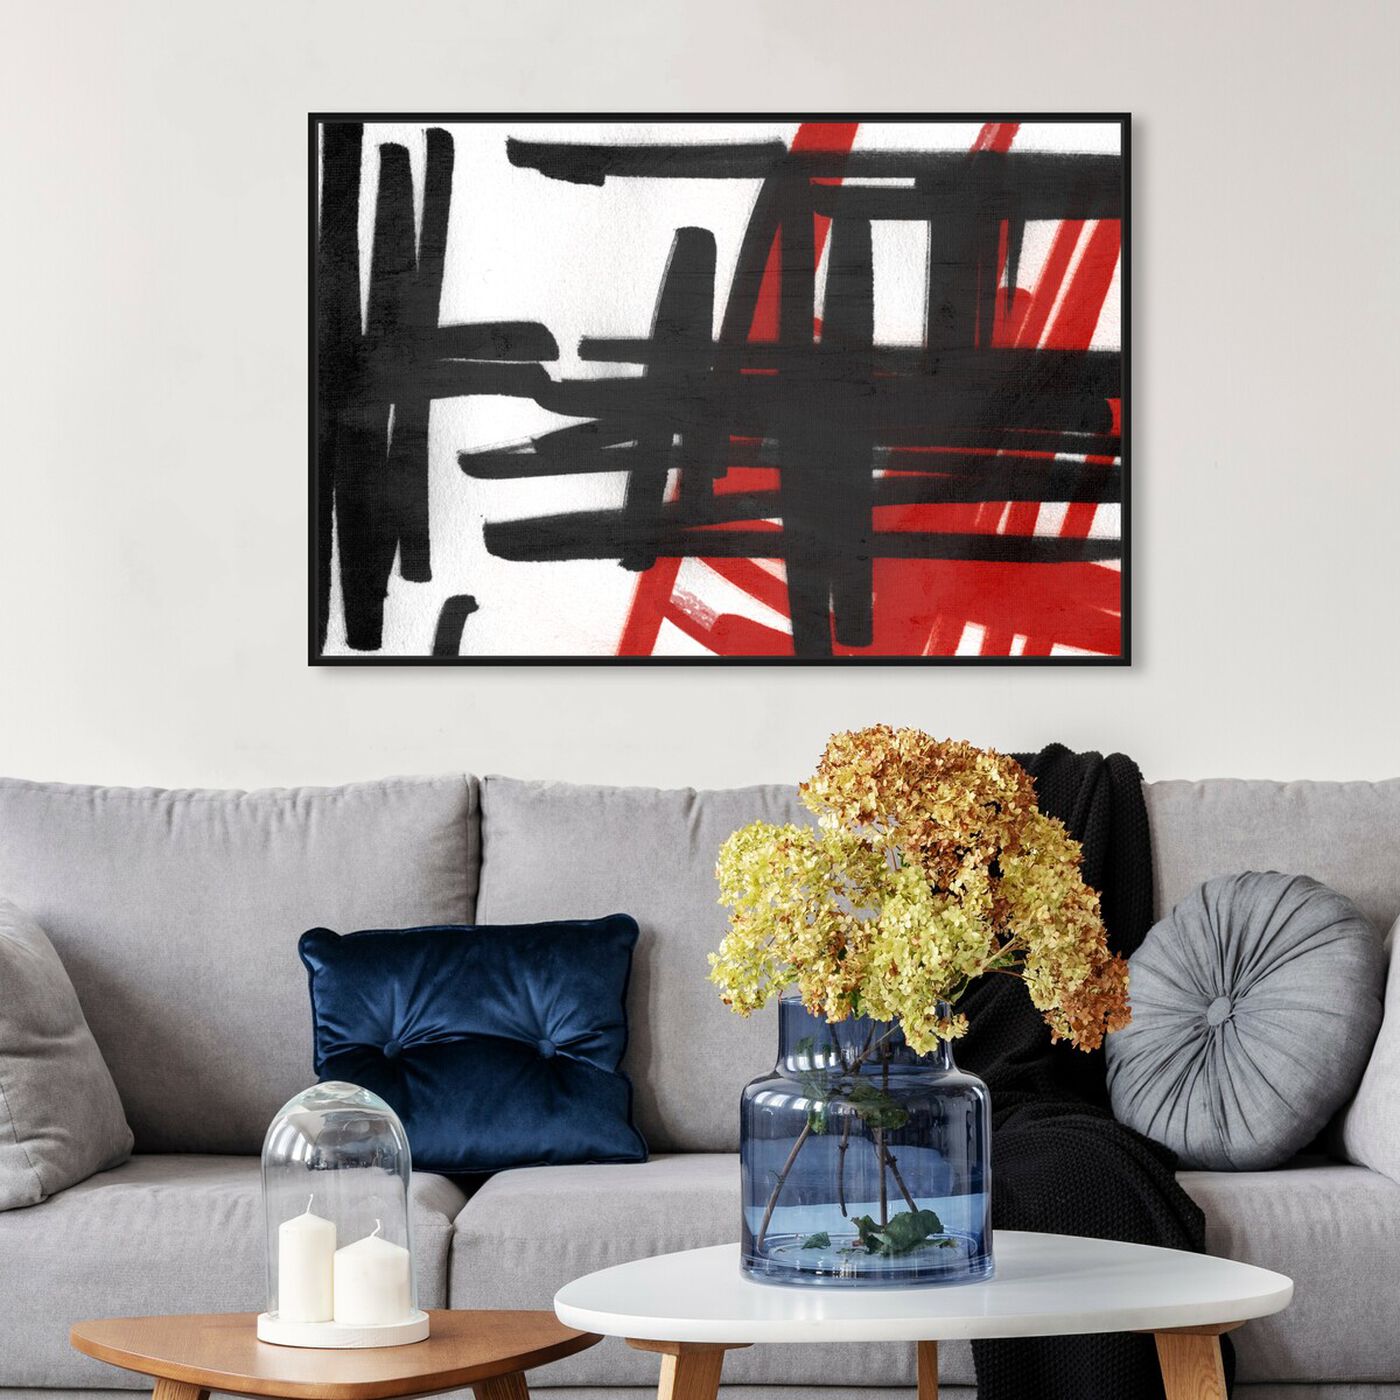 Hanging view of Best Days featuring abstract and shapes art.